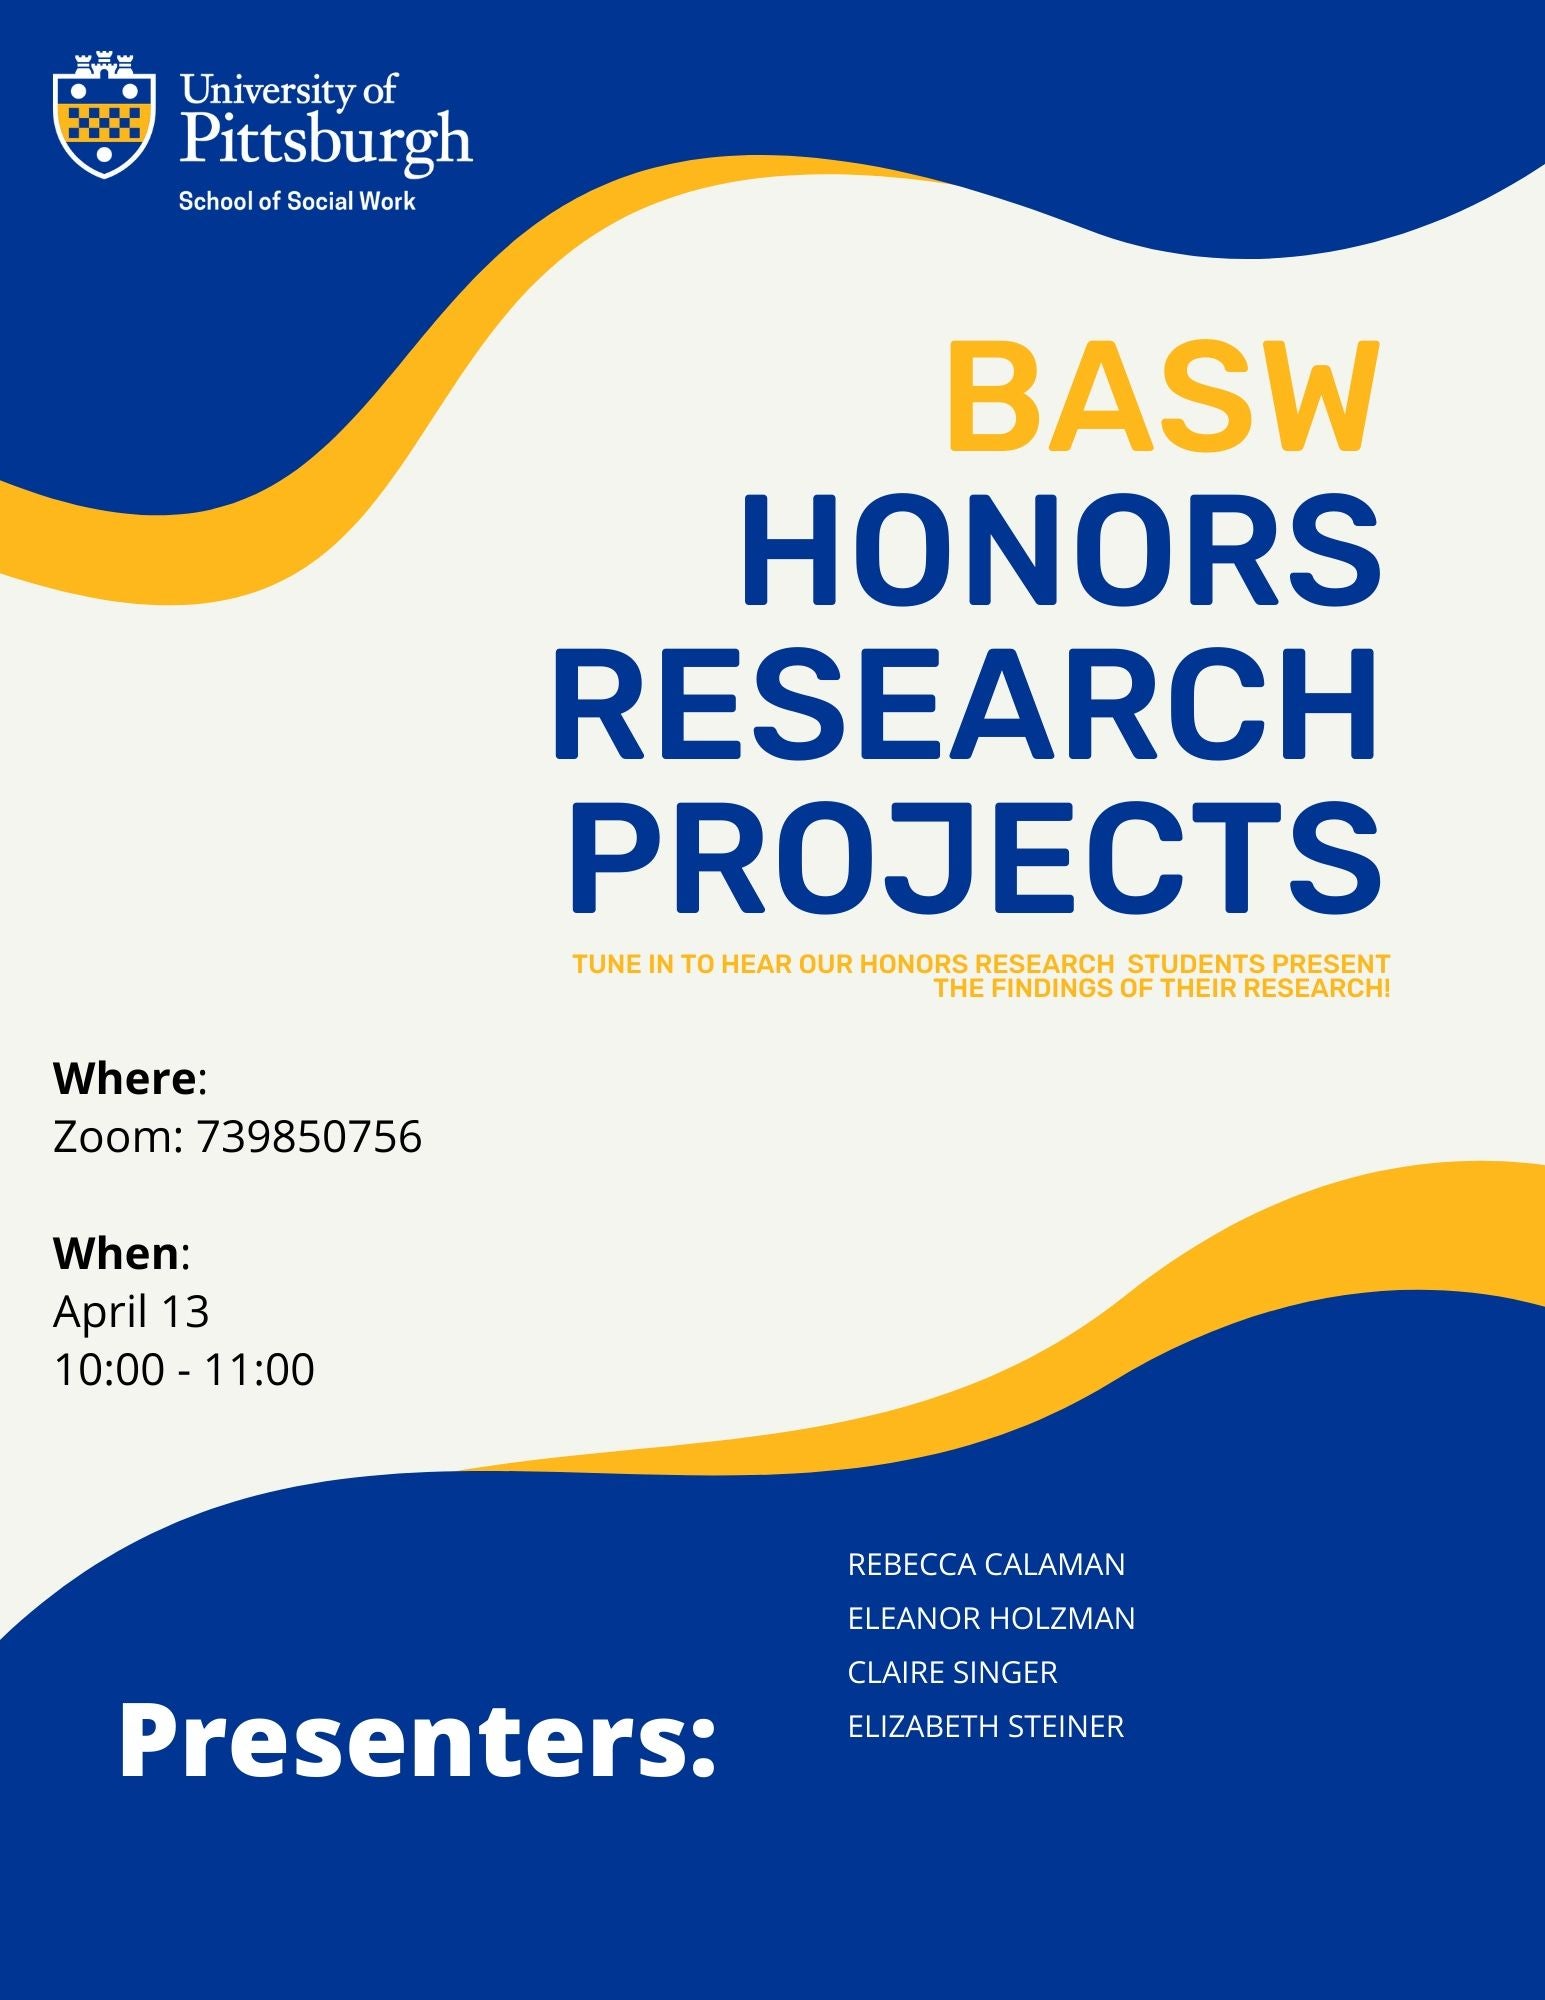 BASW Honors Research projects flyer